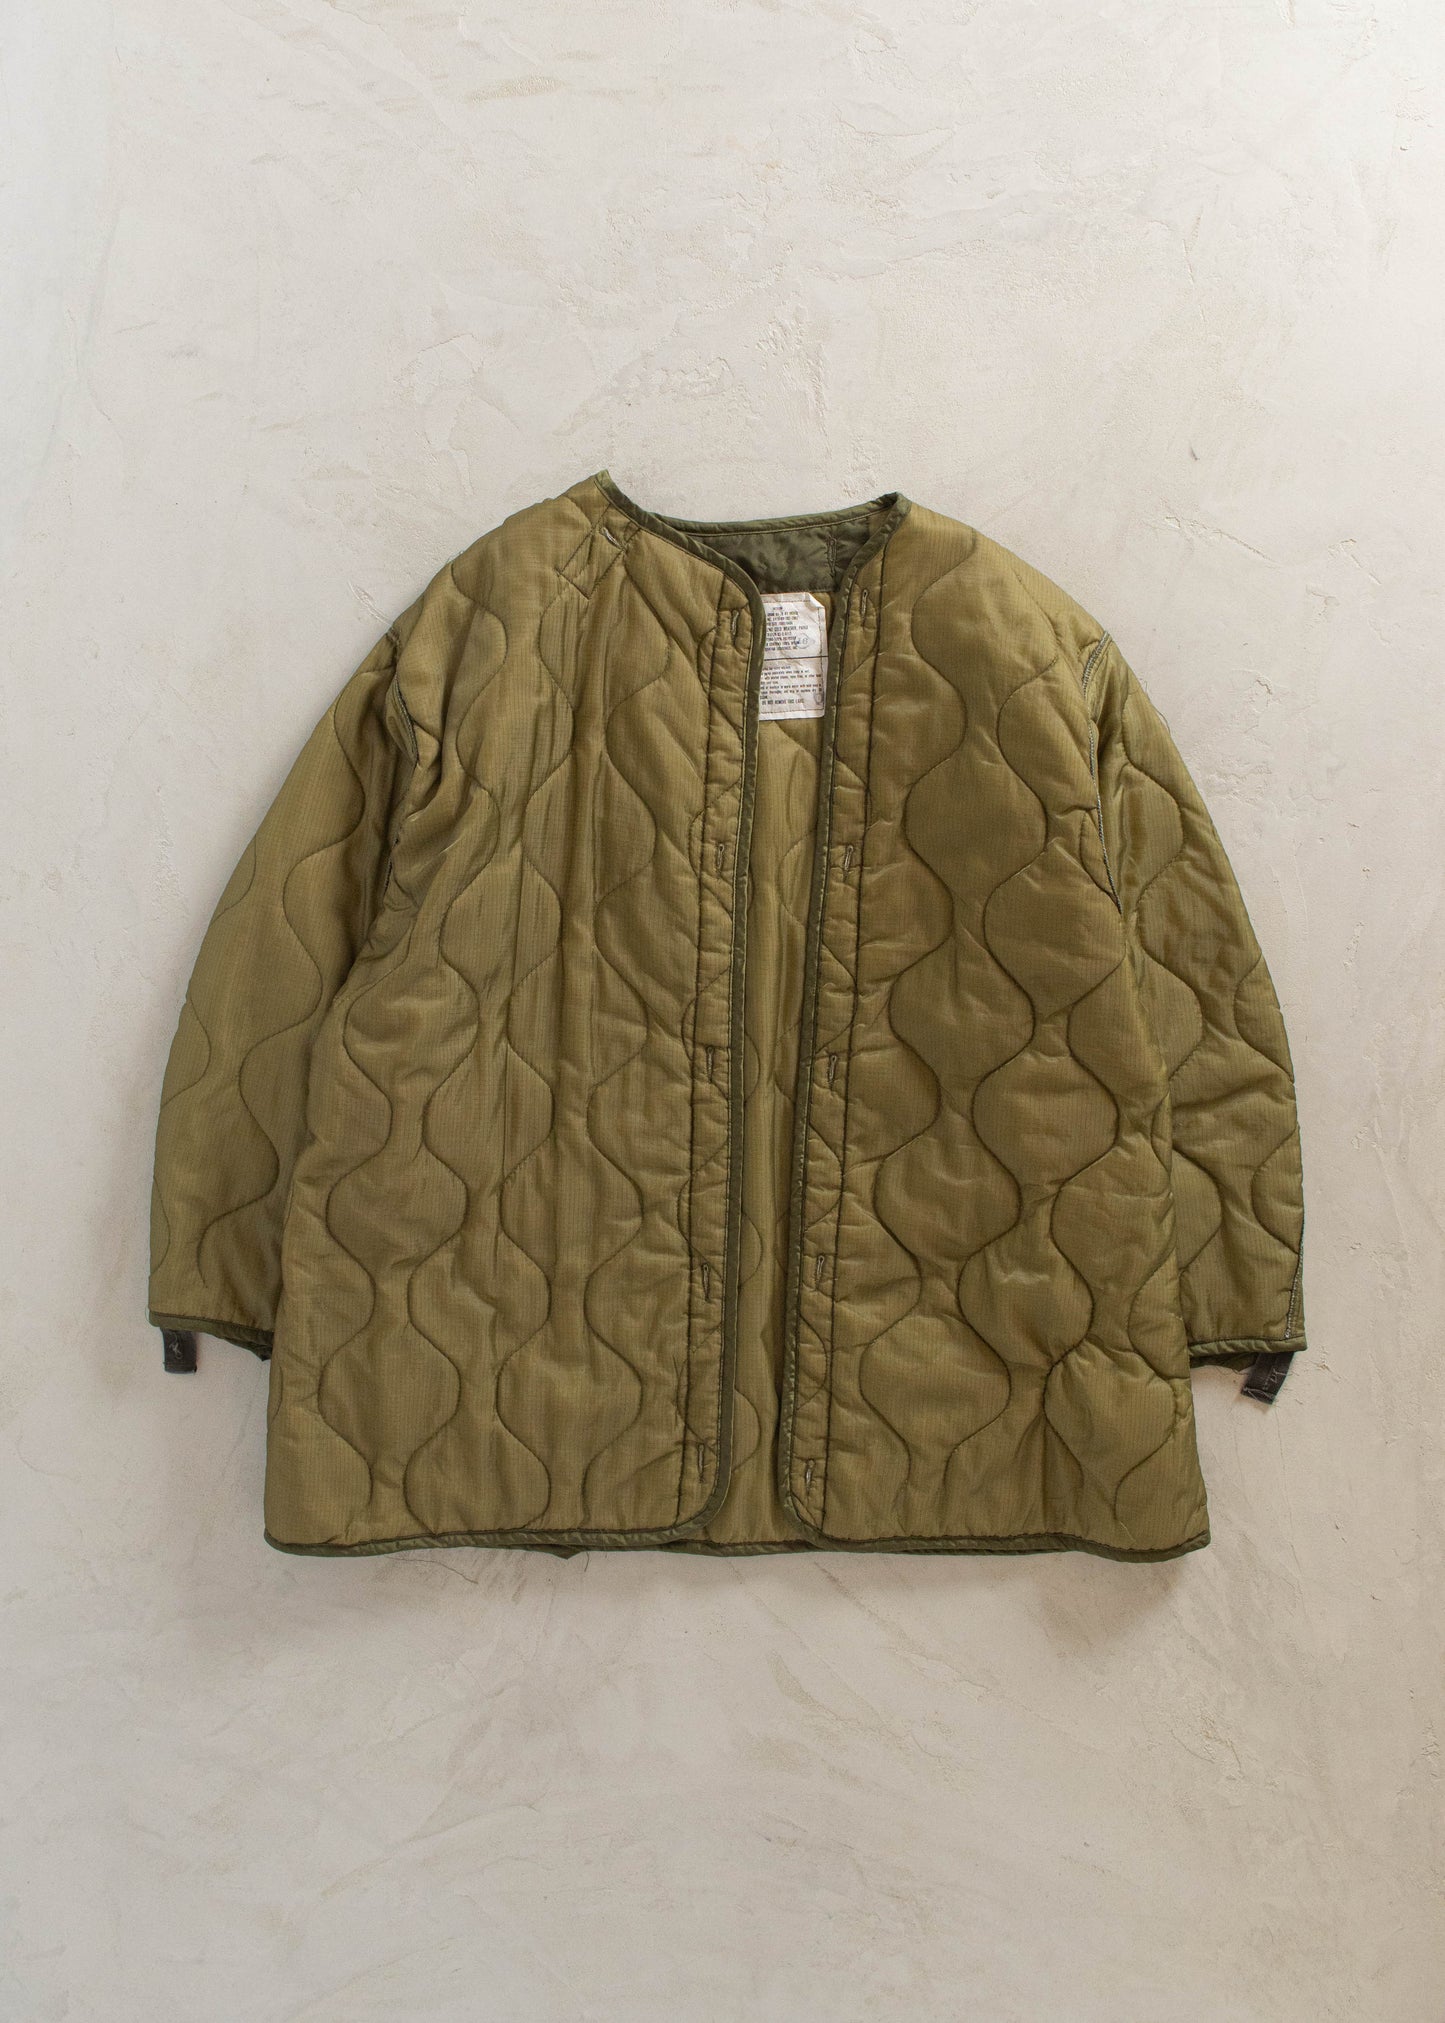 1980s Military M-65 Quilted Liner Jacket Size 2XL/3XL